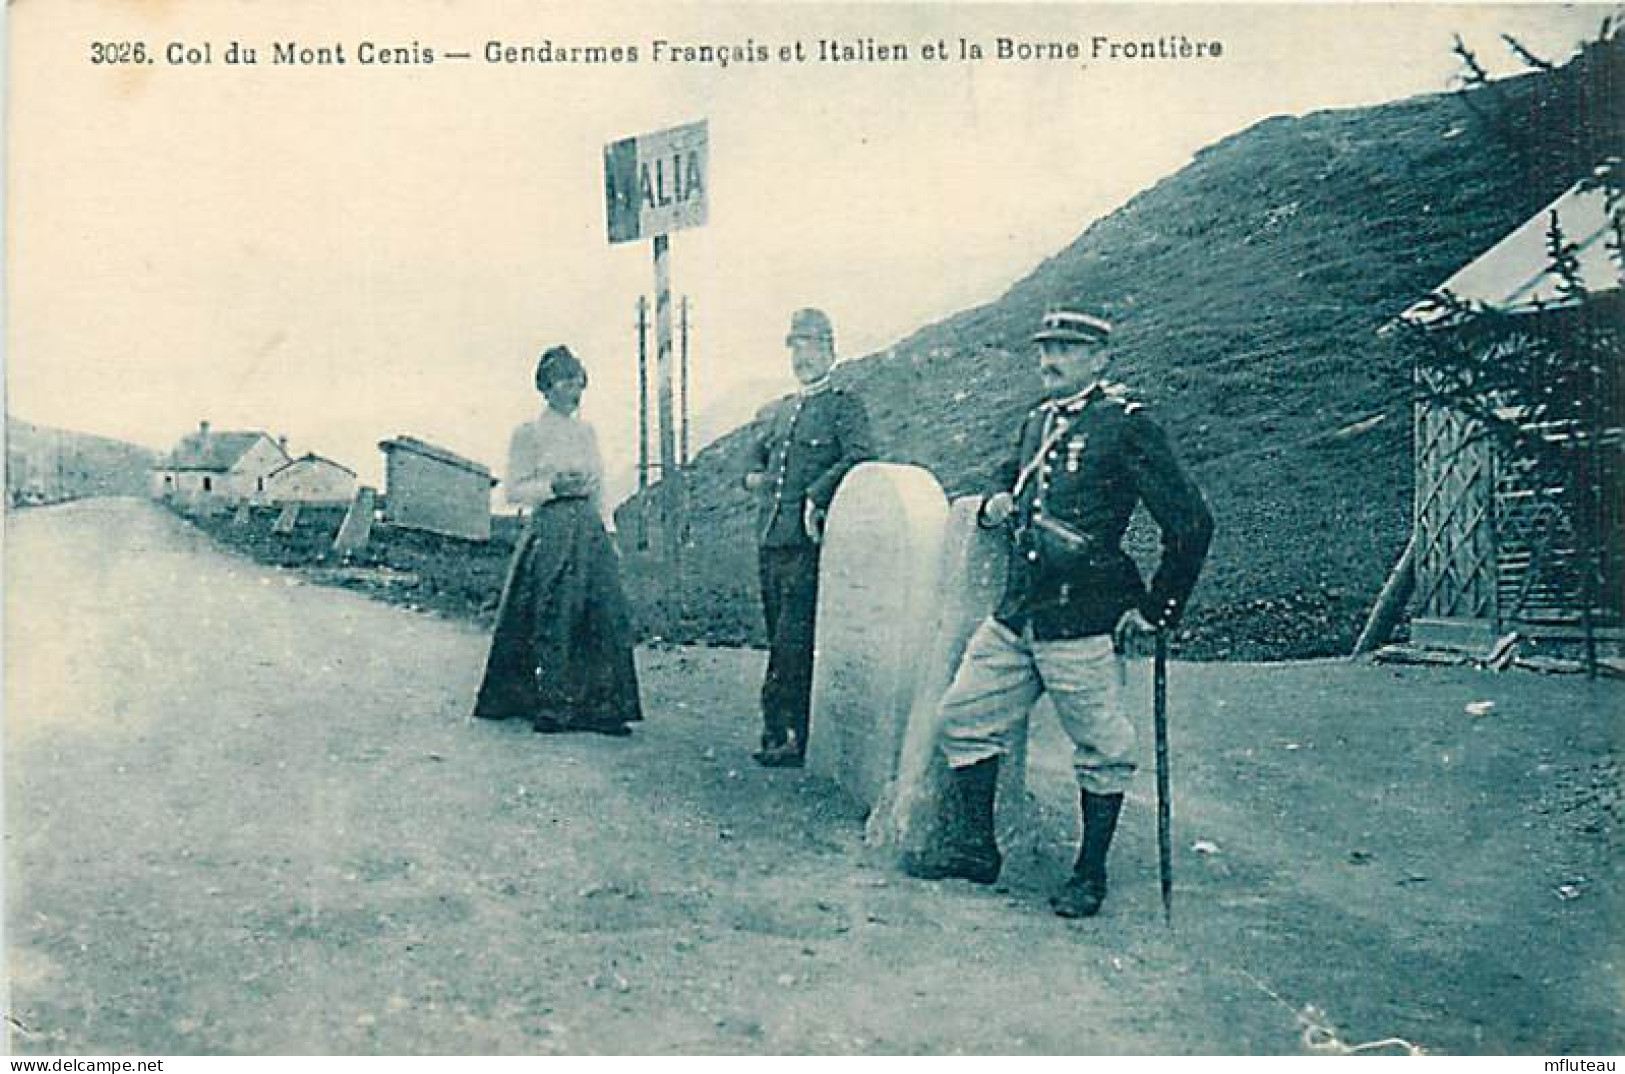 73* MONT CENIS  Fronriere  Gendarmes Francais Et Italien            RL06.1202 - Politie-Rijkswacht